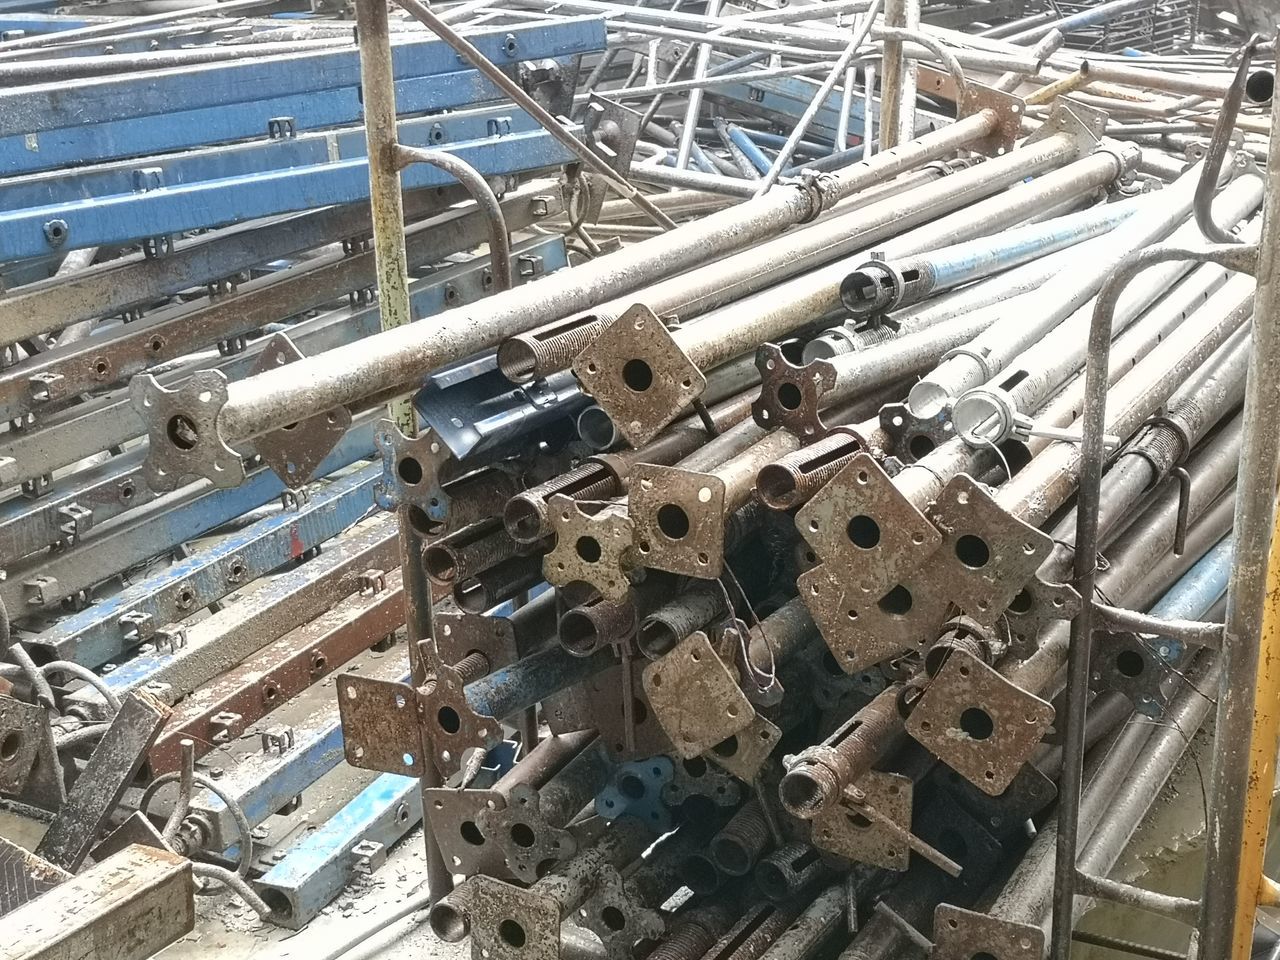 HIGH ANGLE VIEW OF MACHINE PART OF FACTORY